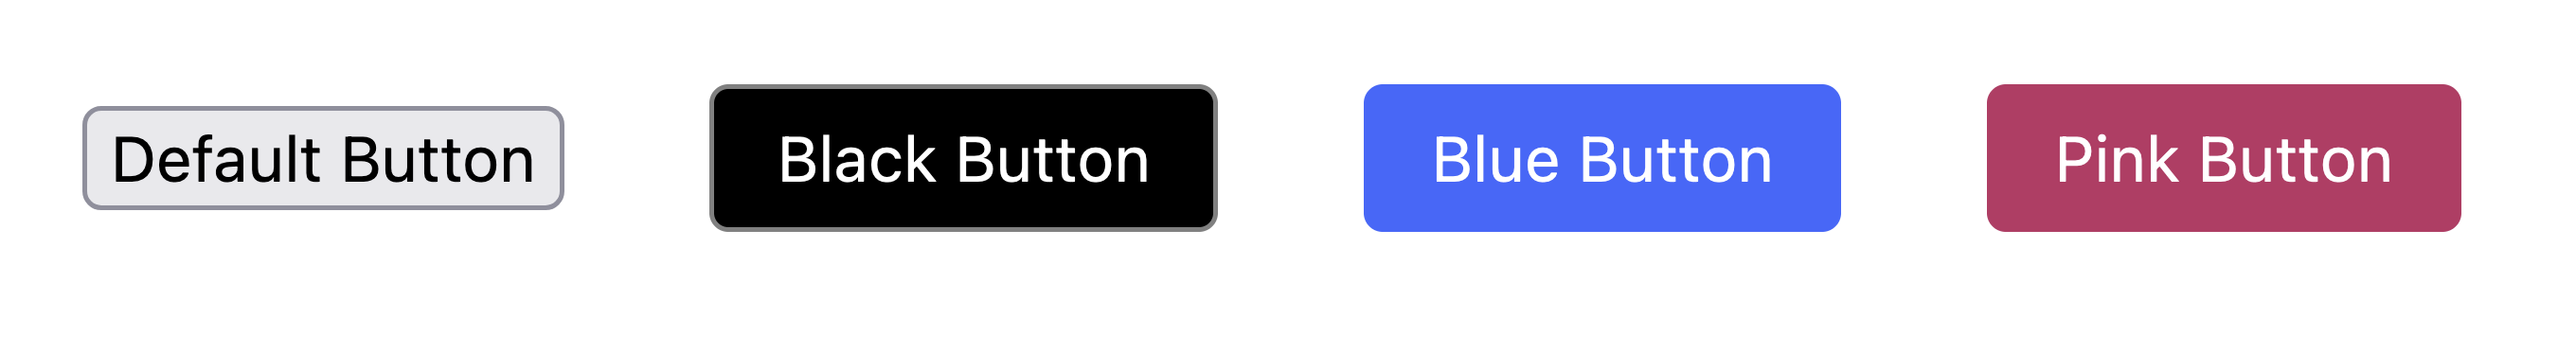 The four buttons. From left to right: the native unstyled button. It has a white background and a grey border in most browsers. A black button with a grey border. A blue button. And a deepPink button.